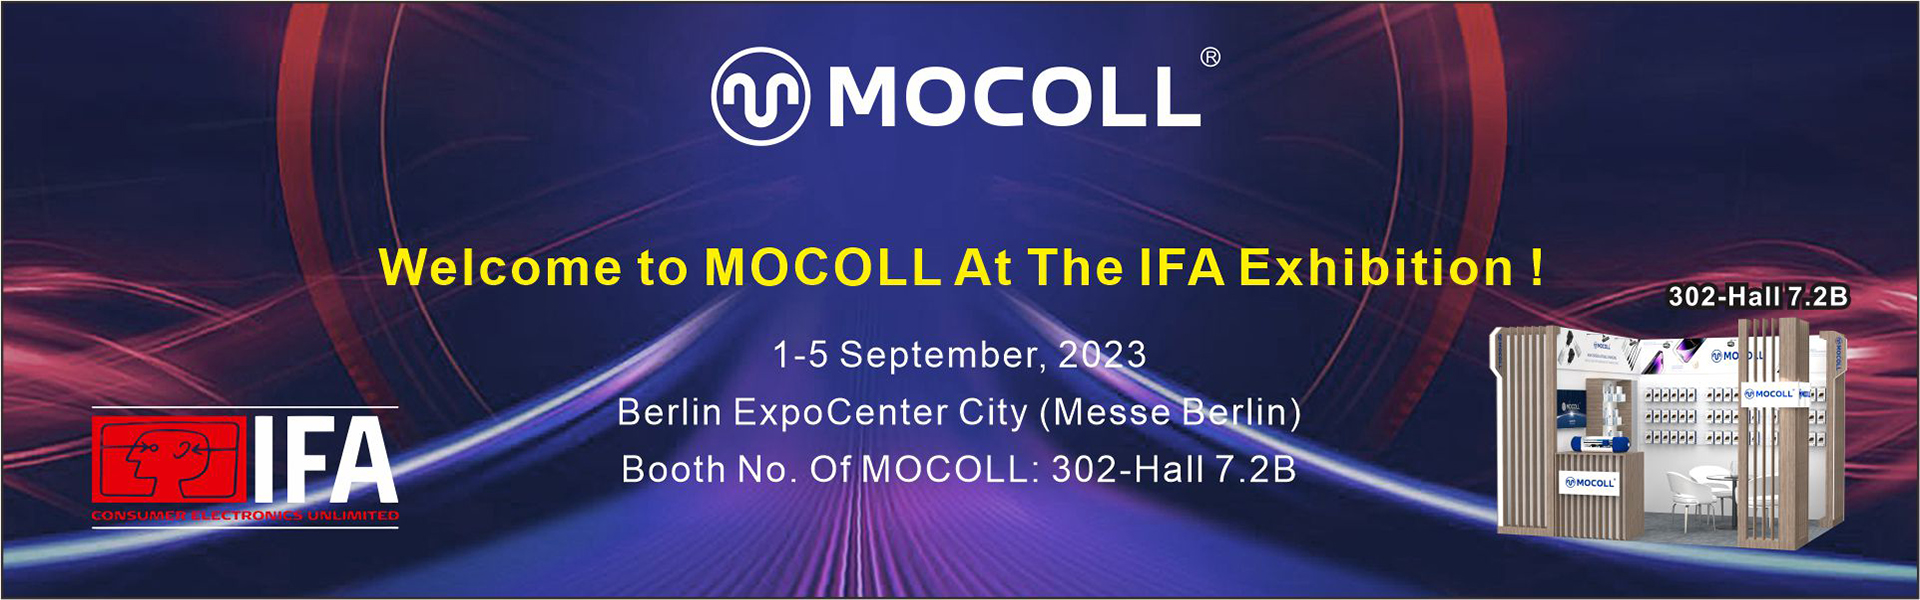 Welcome To Visit MOCOLL At The IFA Exhibition！